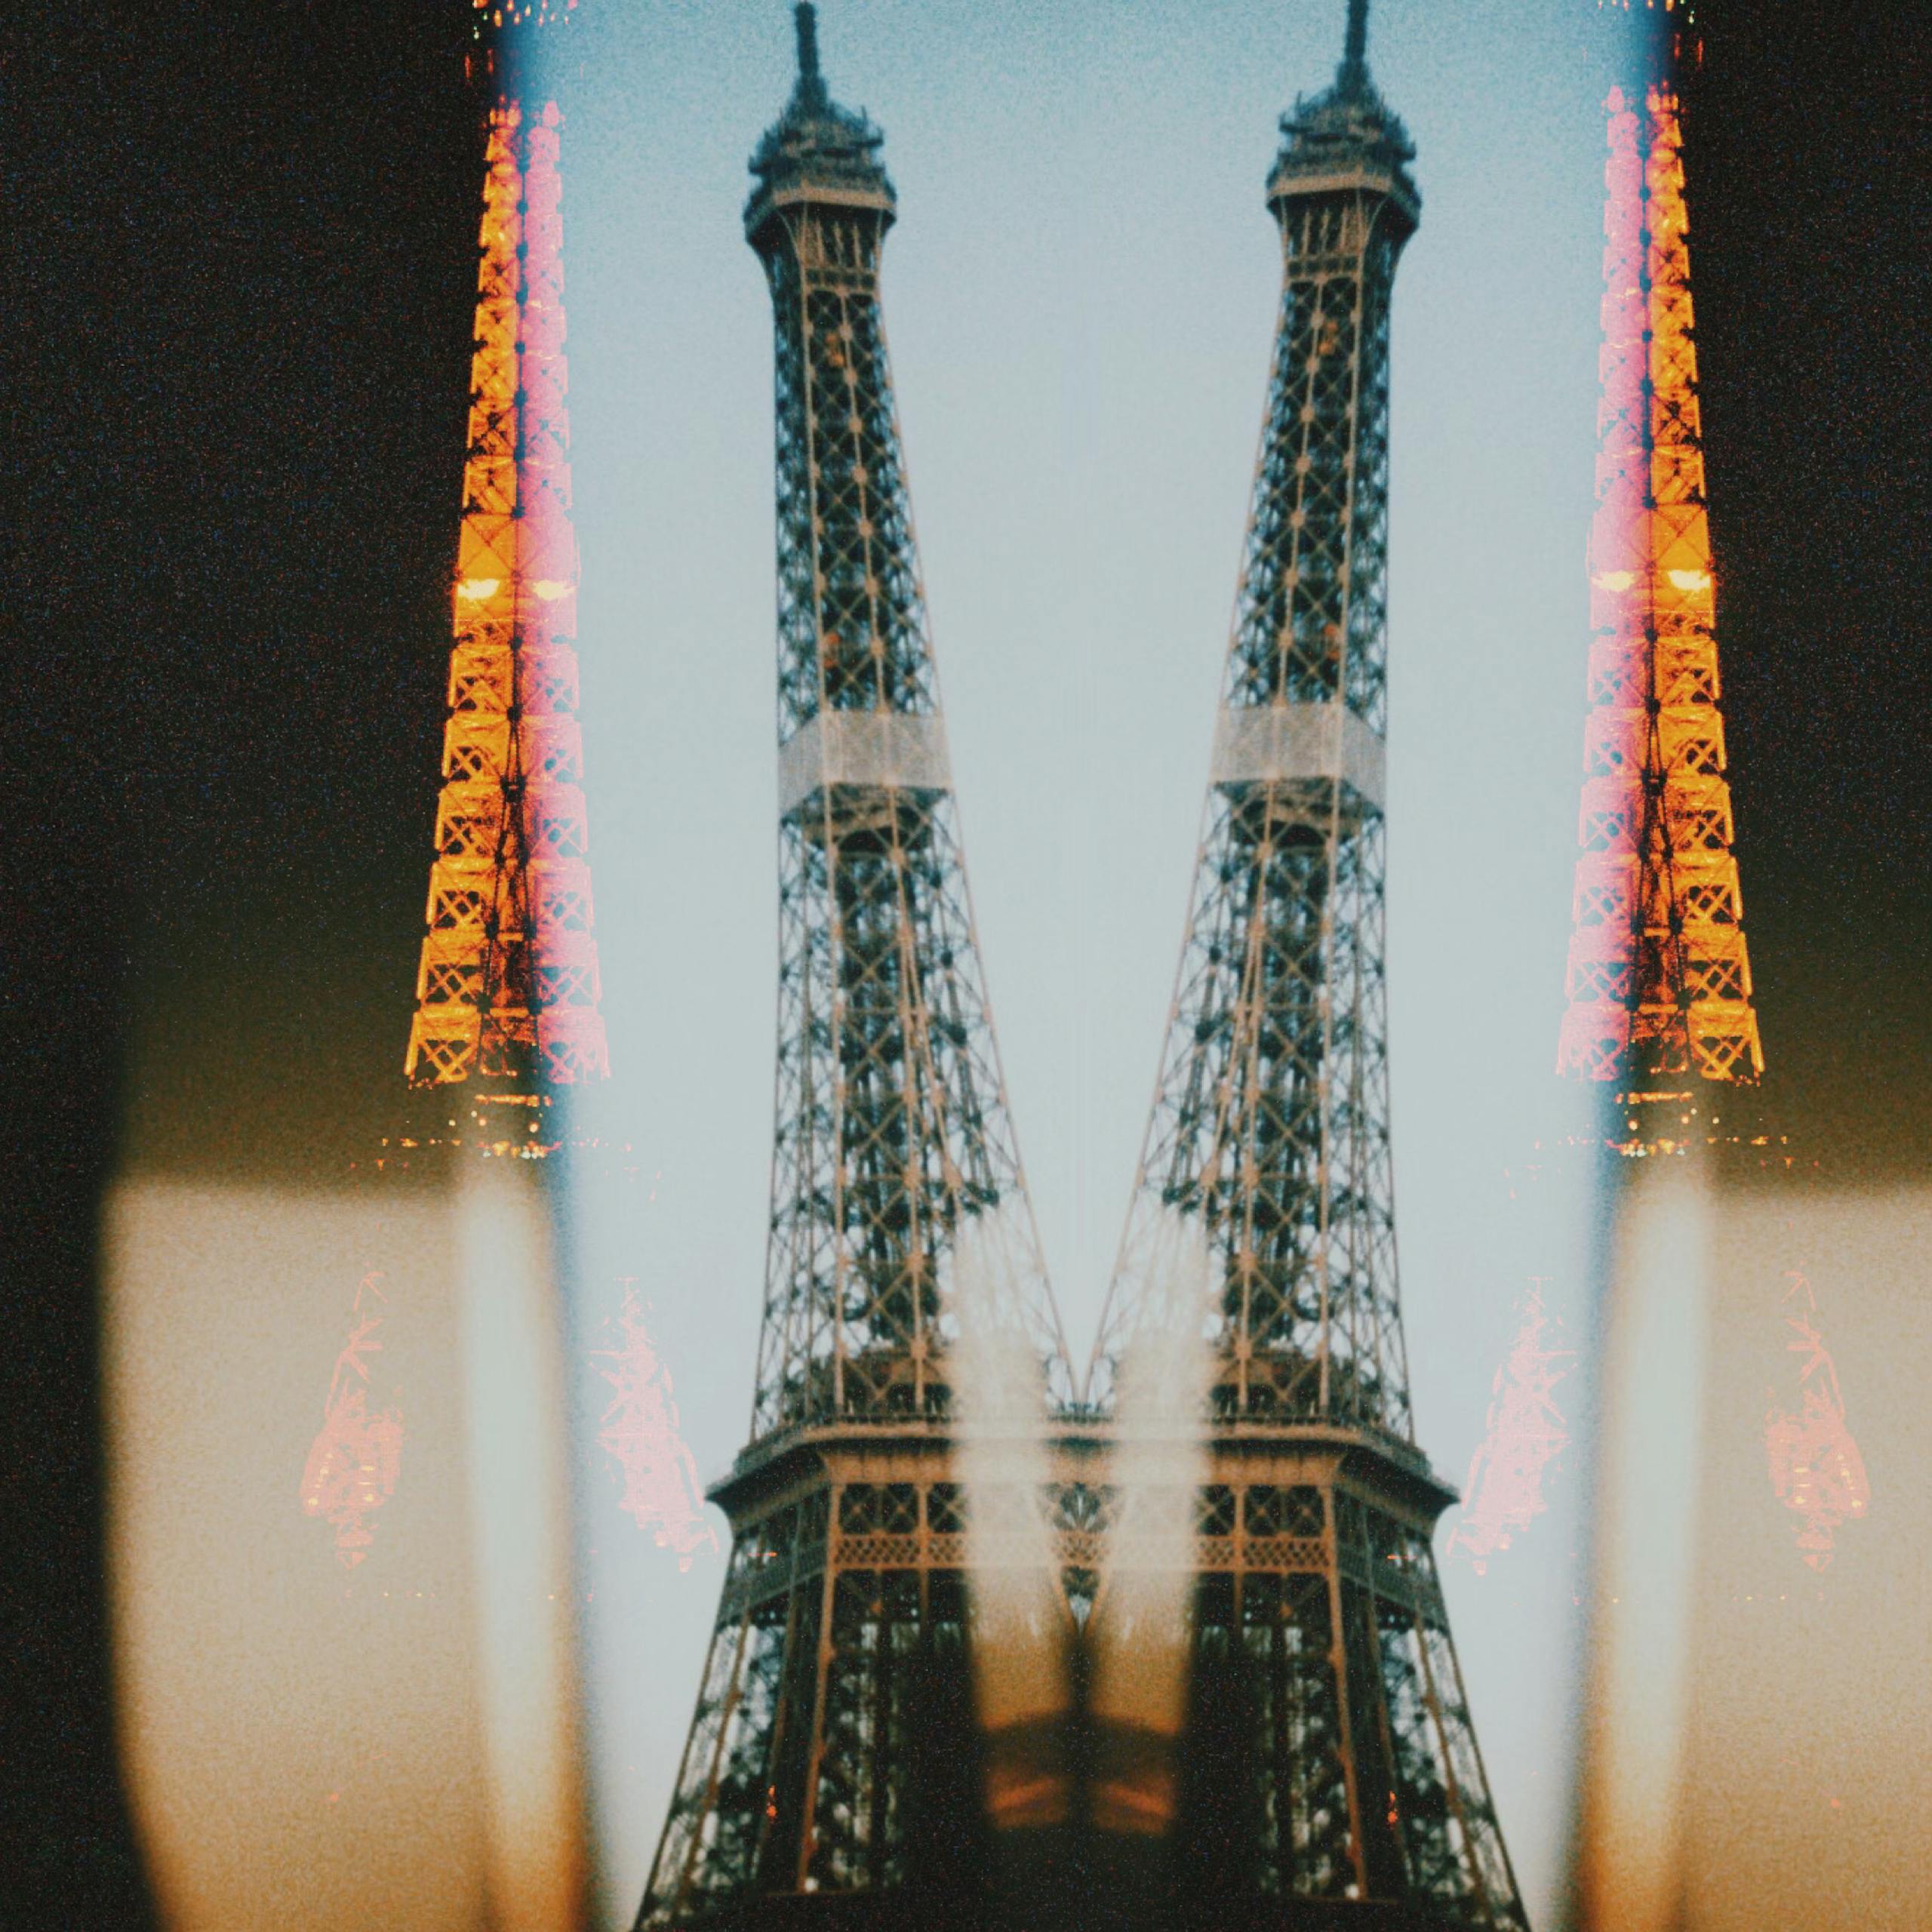 Double exposure of Eiffel Tower recognizable architectural landmark located in Paris and attracting tourist